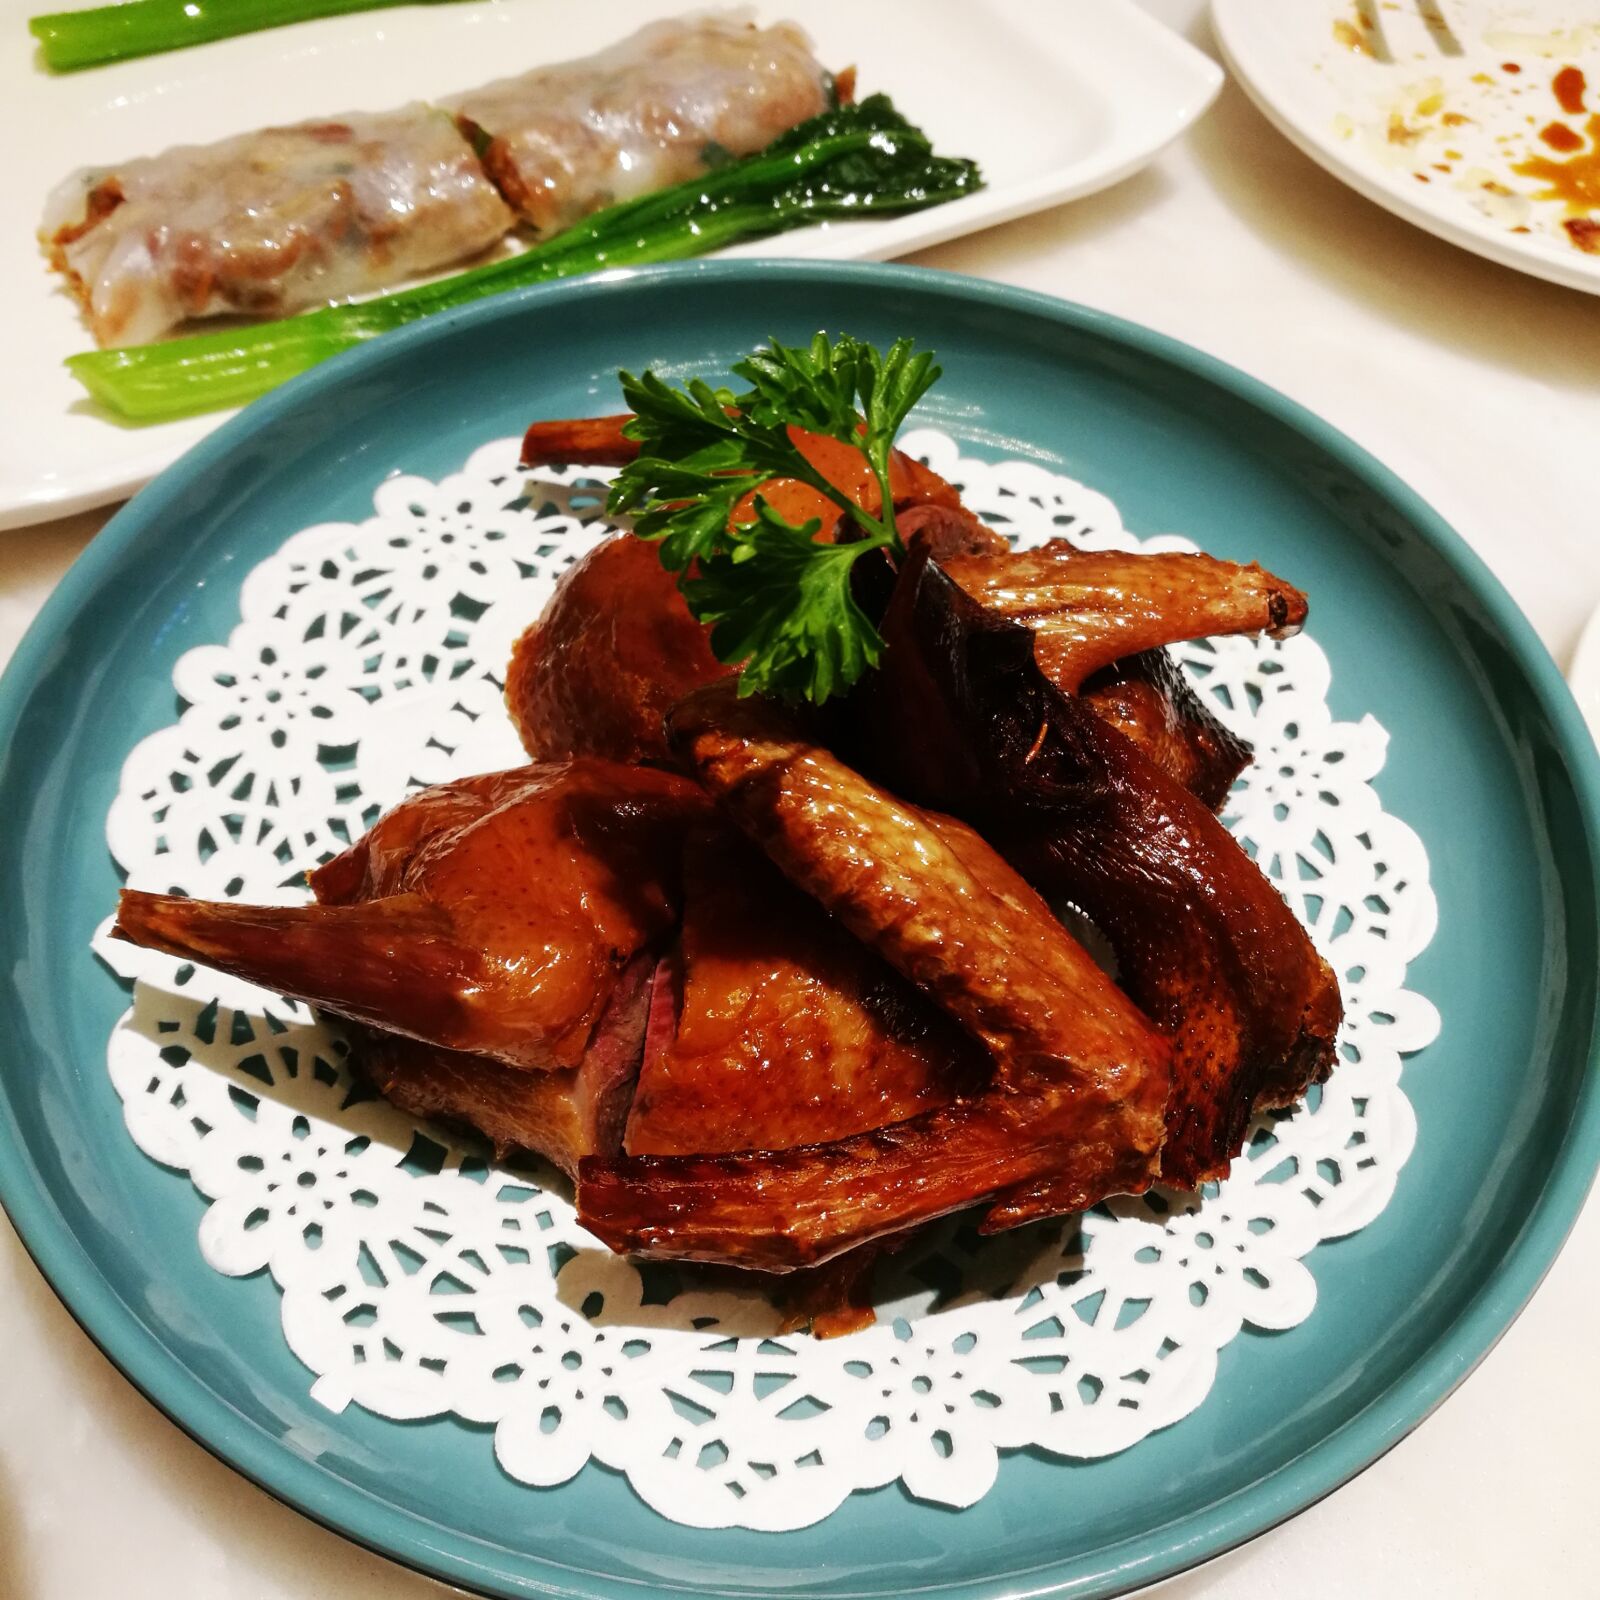 HUAWEI Honor 8 sample photo. Food, meat, plate photography